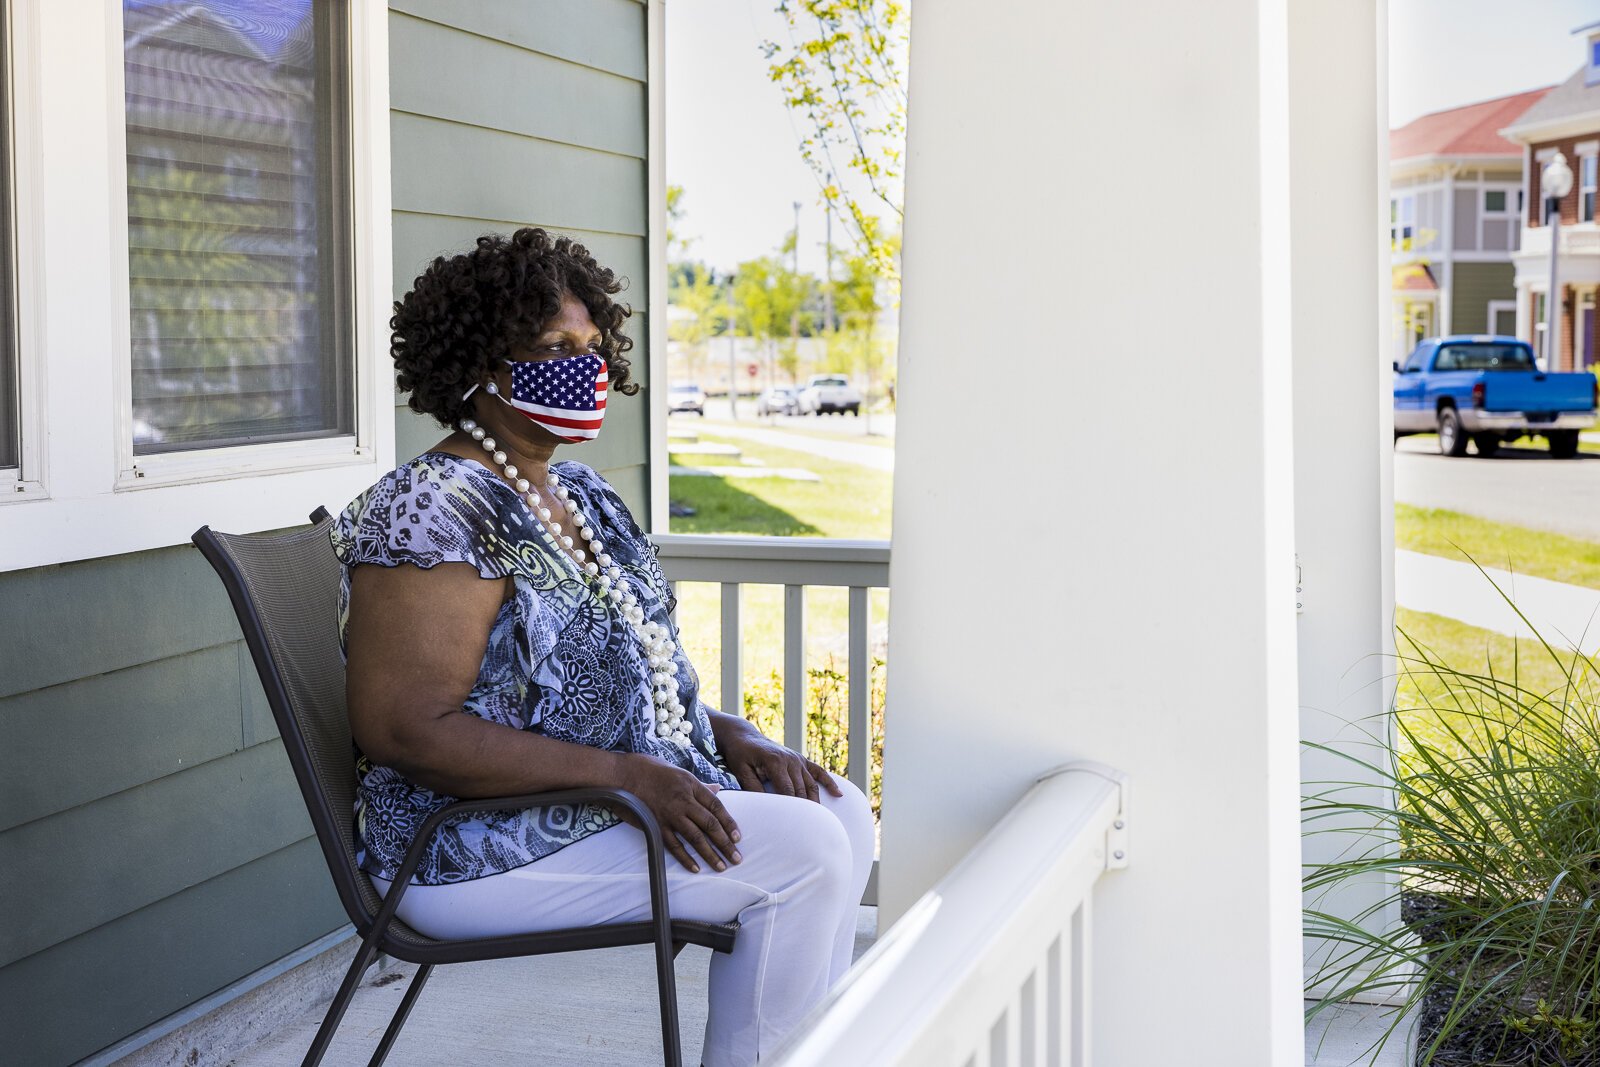 Denise Oher sits on a neighbor's porch and looks out over the new Foote Park at South City development. Oher is a former Foote Homes resident who has chosen to return after being displaced for the demolition of Foote Homes. (Ziggy Mack)